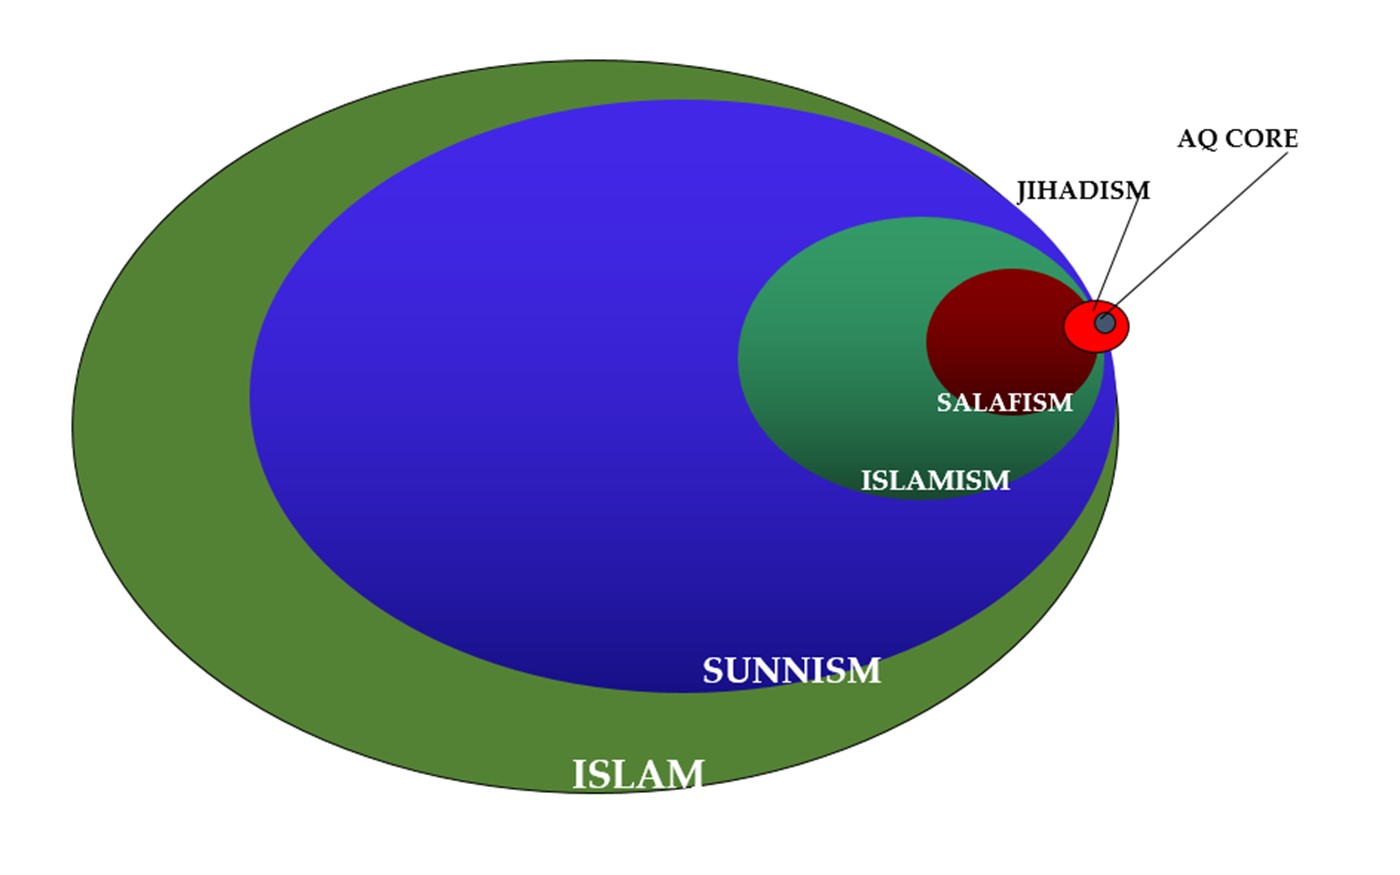  A graph shows the makeup of Islam, with Jihadism making up a very small part of the larger religion. 